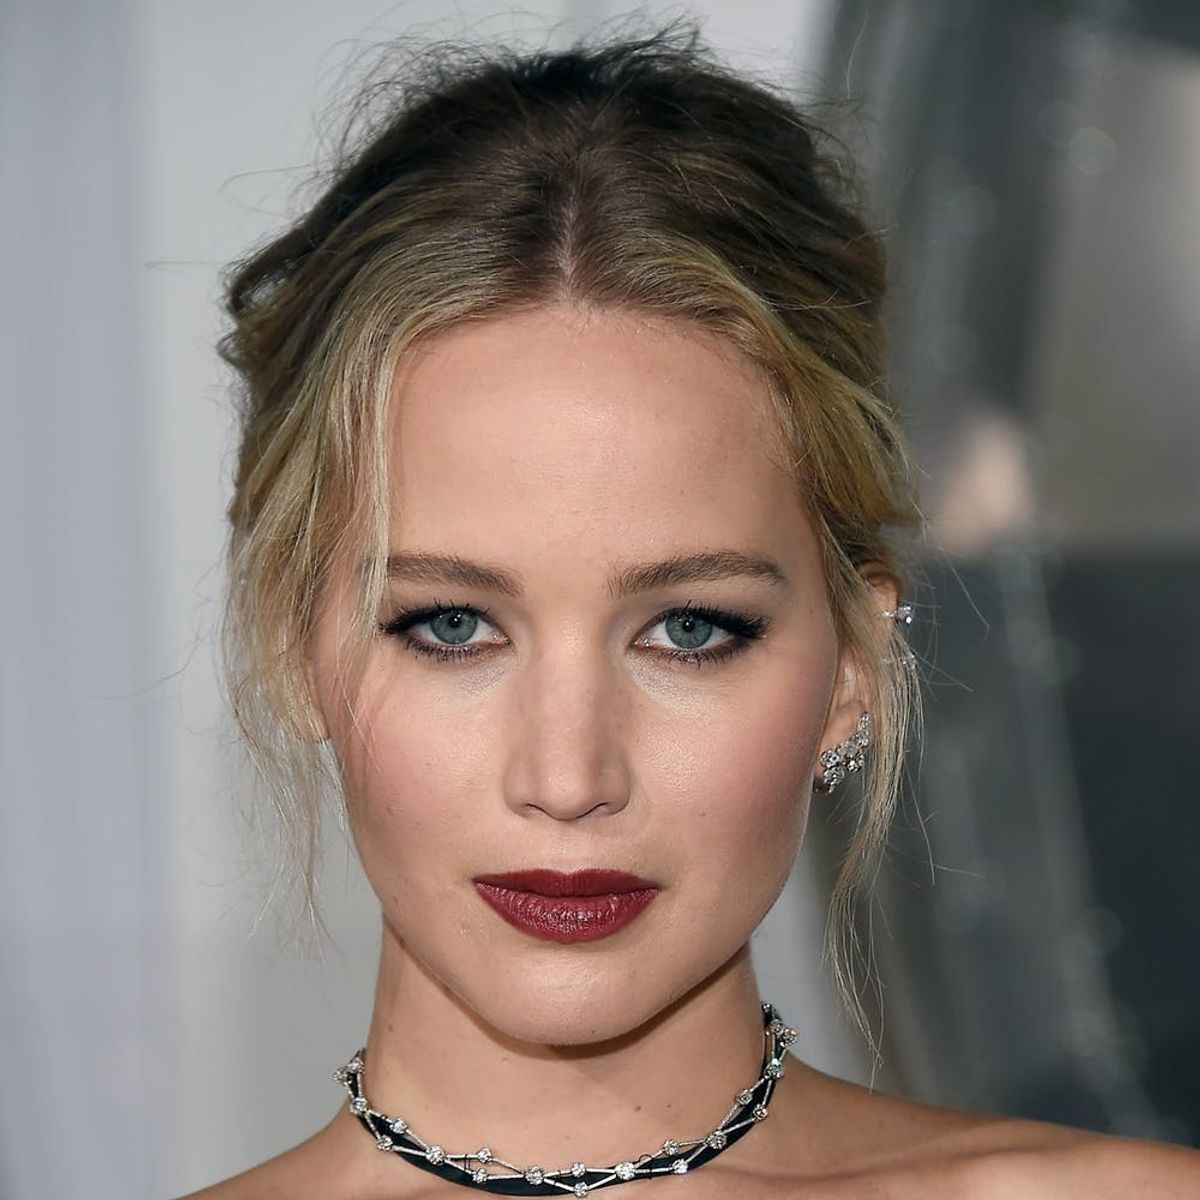 Jennifer Lawrence’s Plane Just Made an Emergency Landing After a Double-Engine Failure